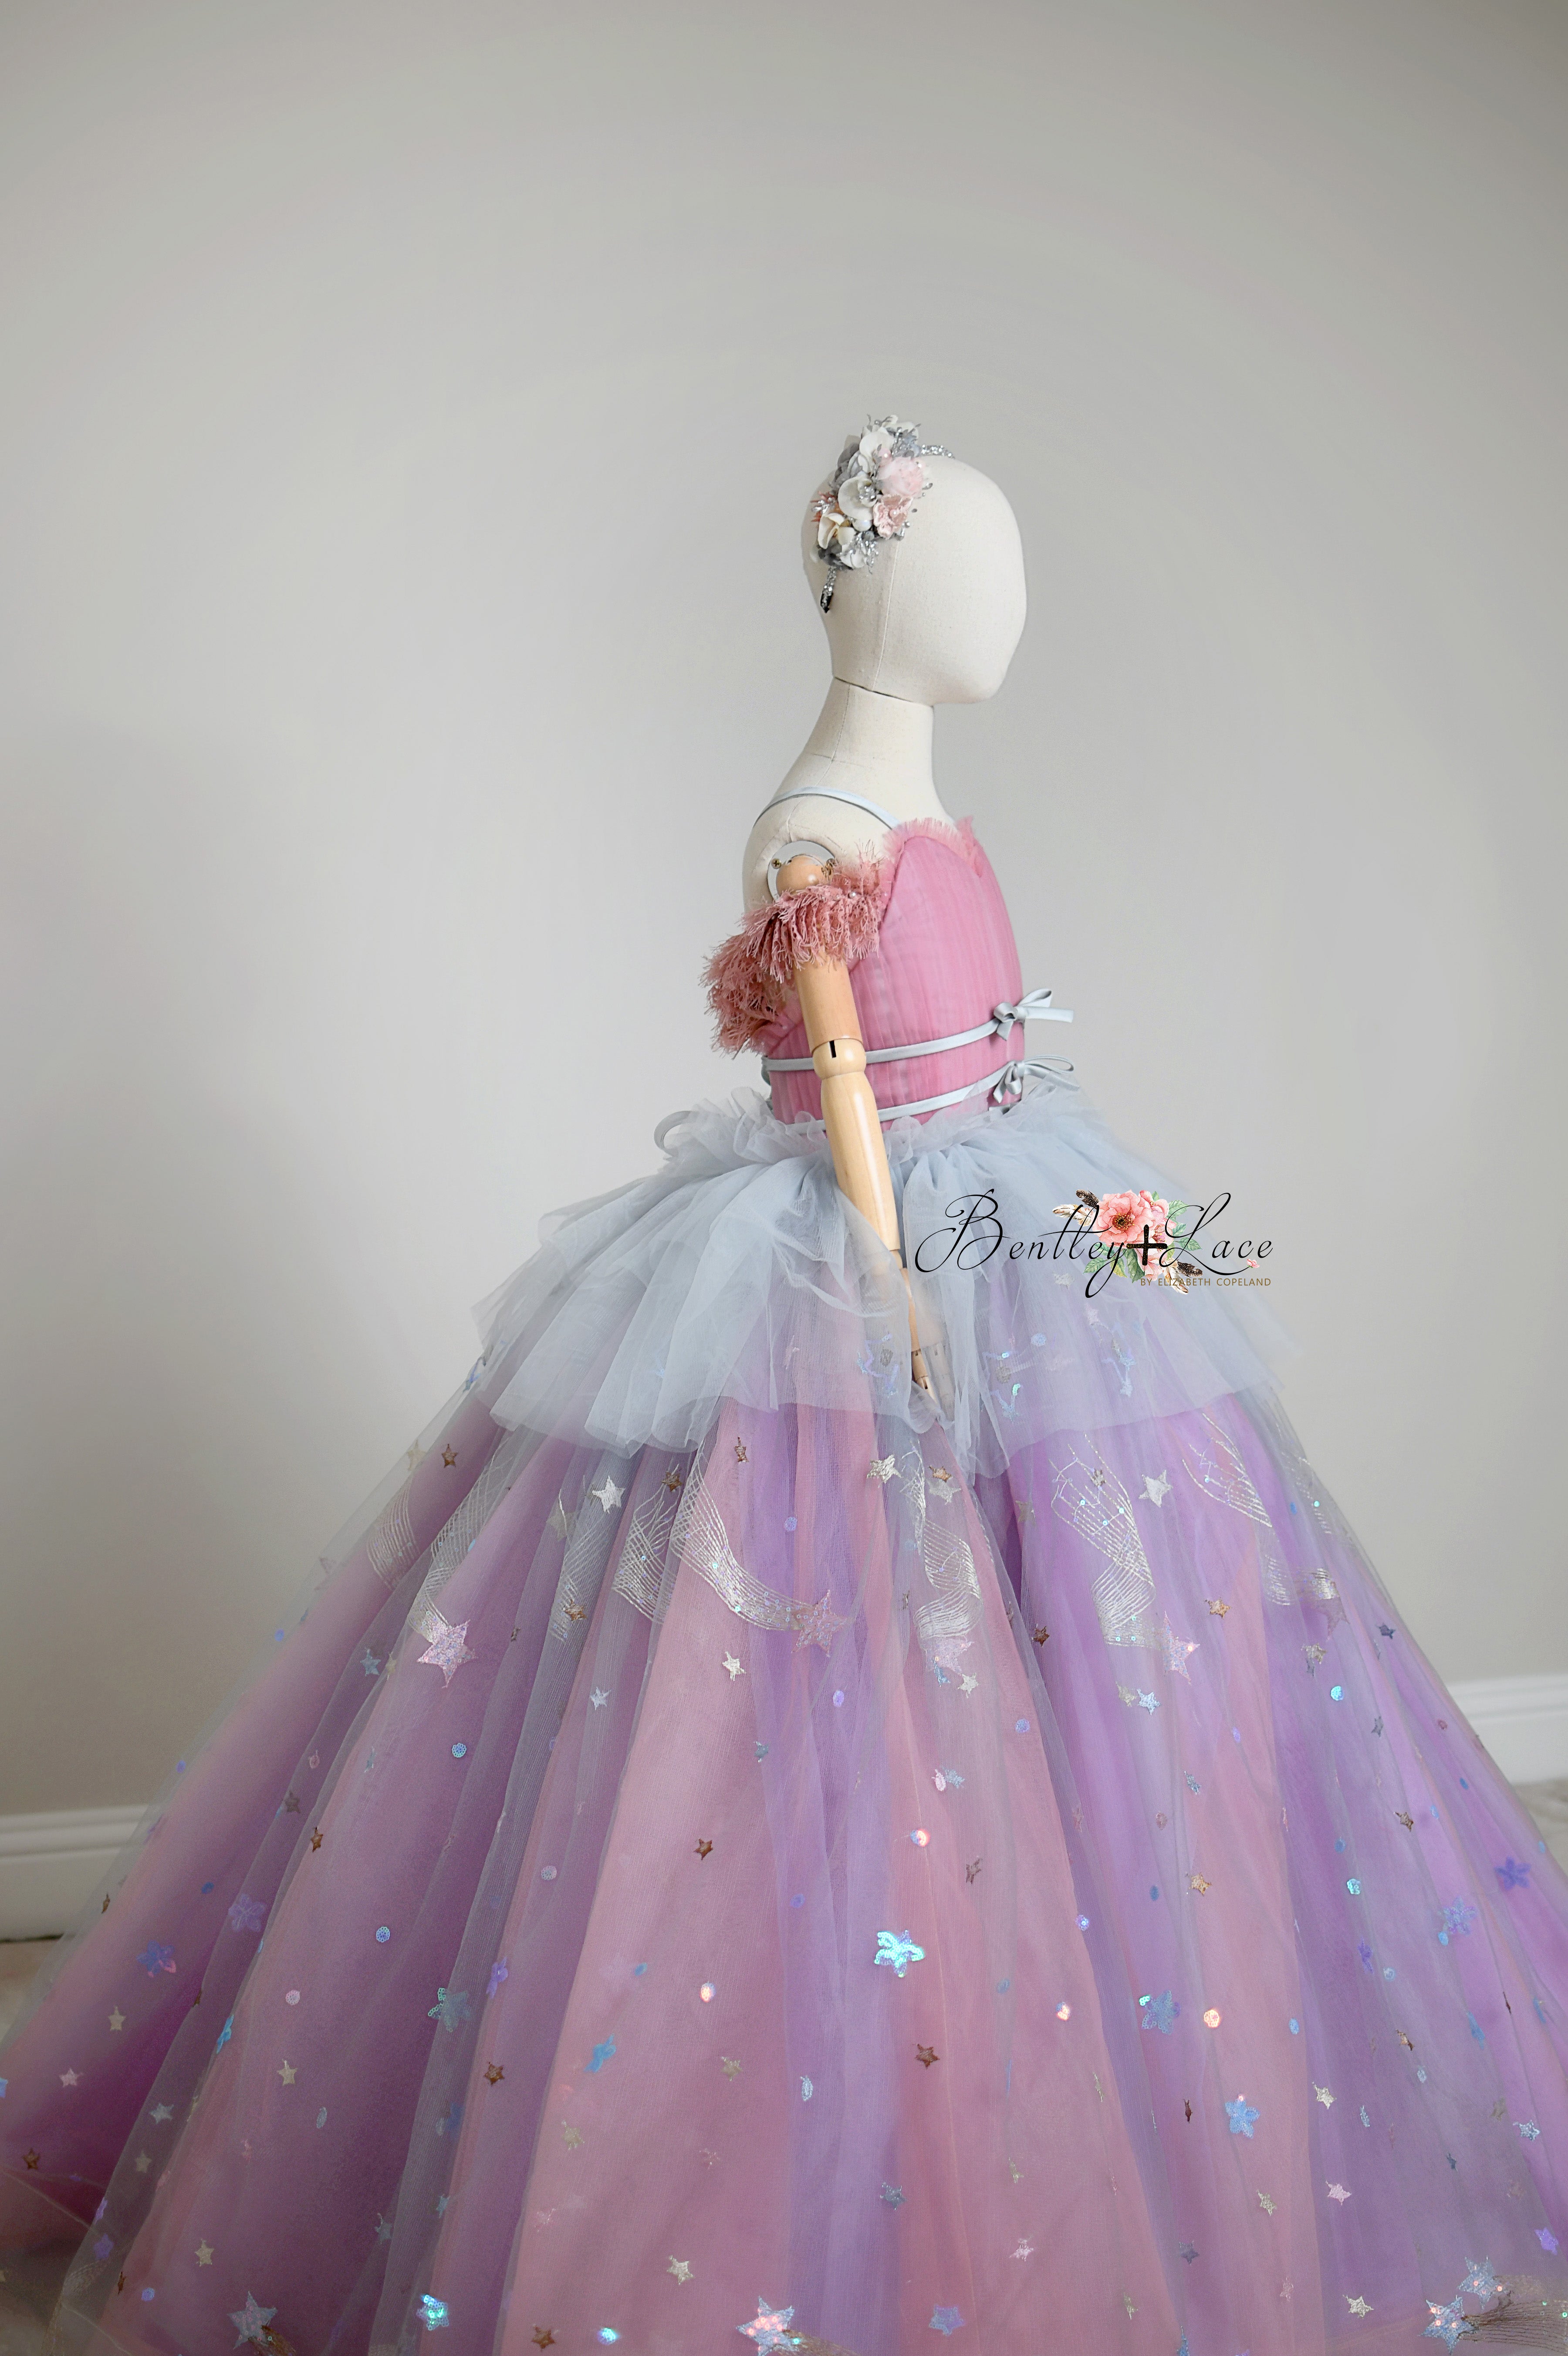 All That Shimmers Gown - Customize your very own silhouette and color pallet